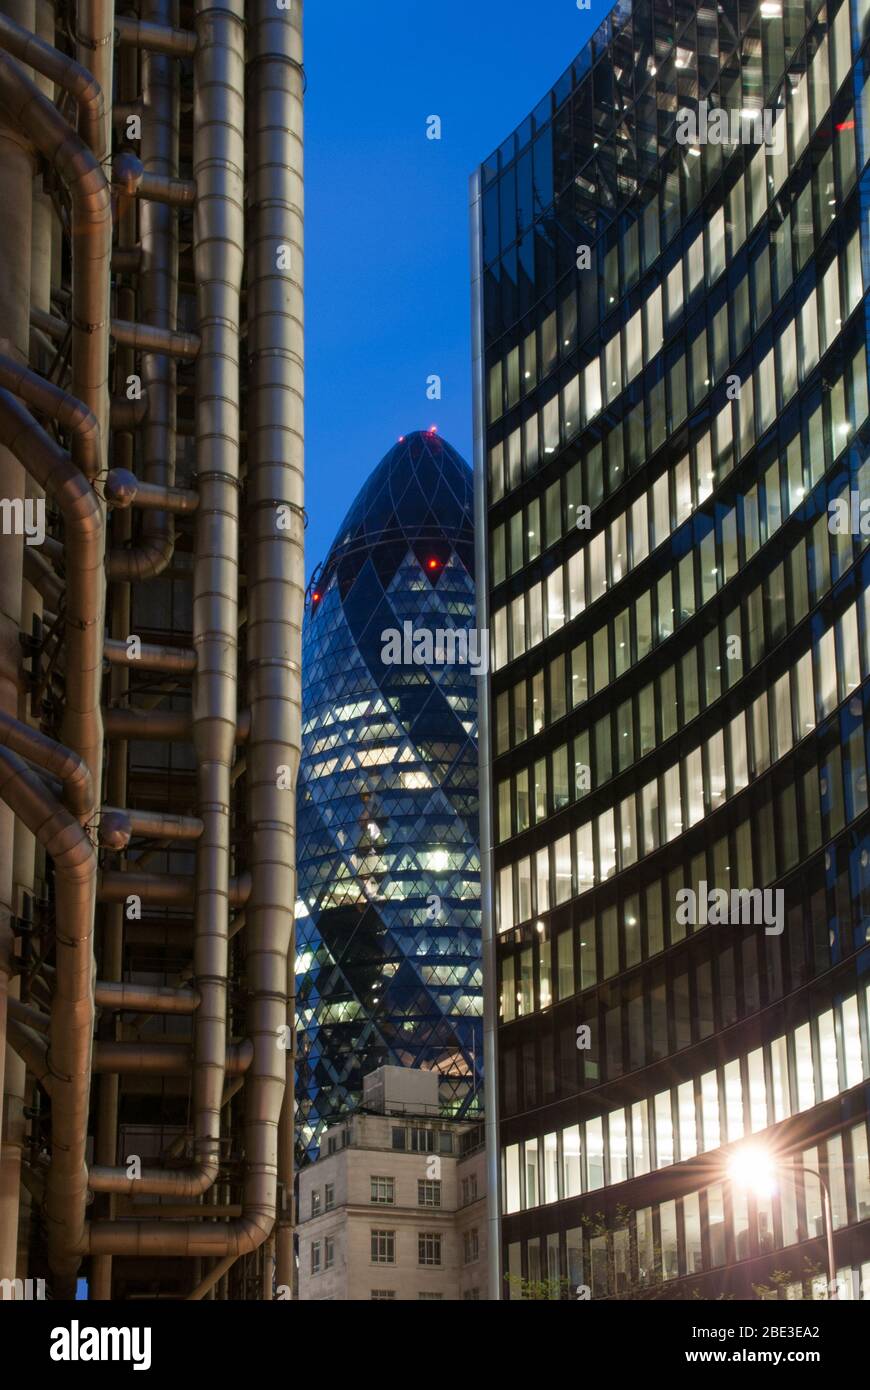 Willis Building Lloyds of London Blue Tower The Gherkin Swiss Re Building 30 St Mary Axe, London EC3A 8BF by Norman Foster & Partners Rogers Stock Photo